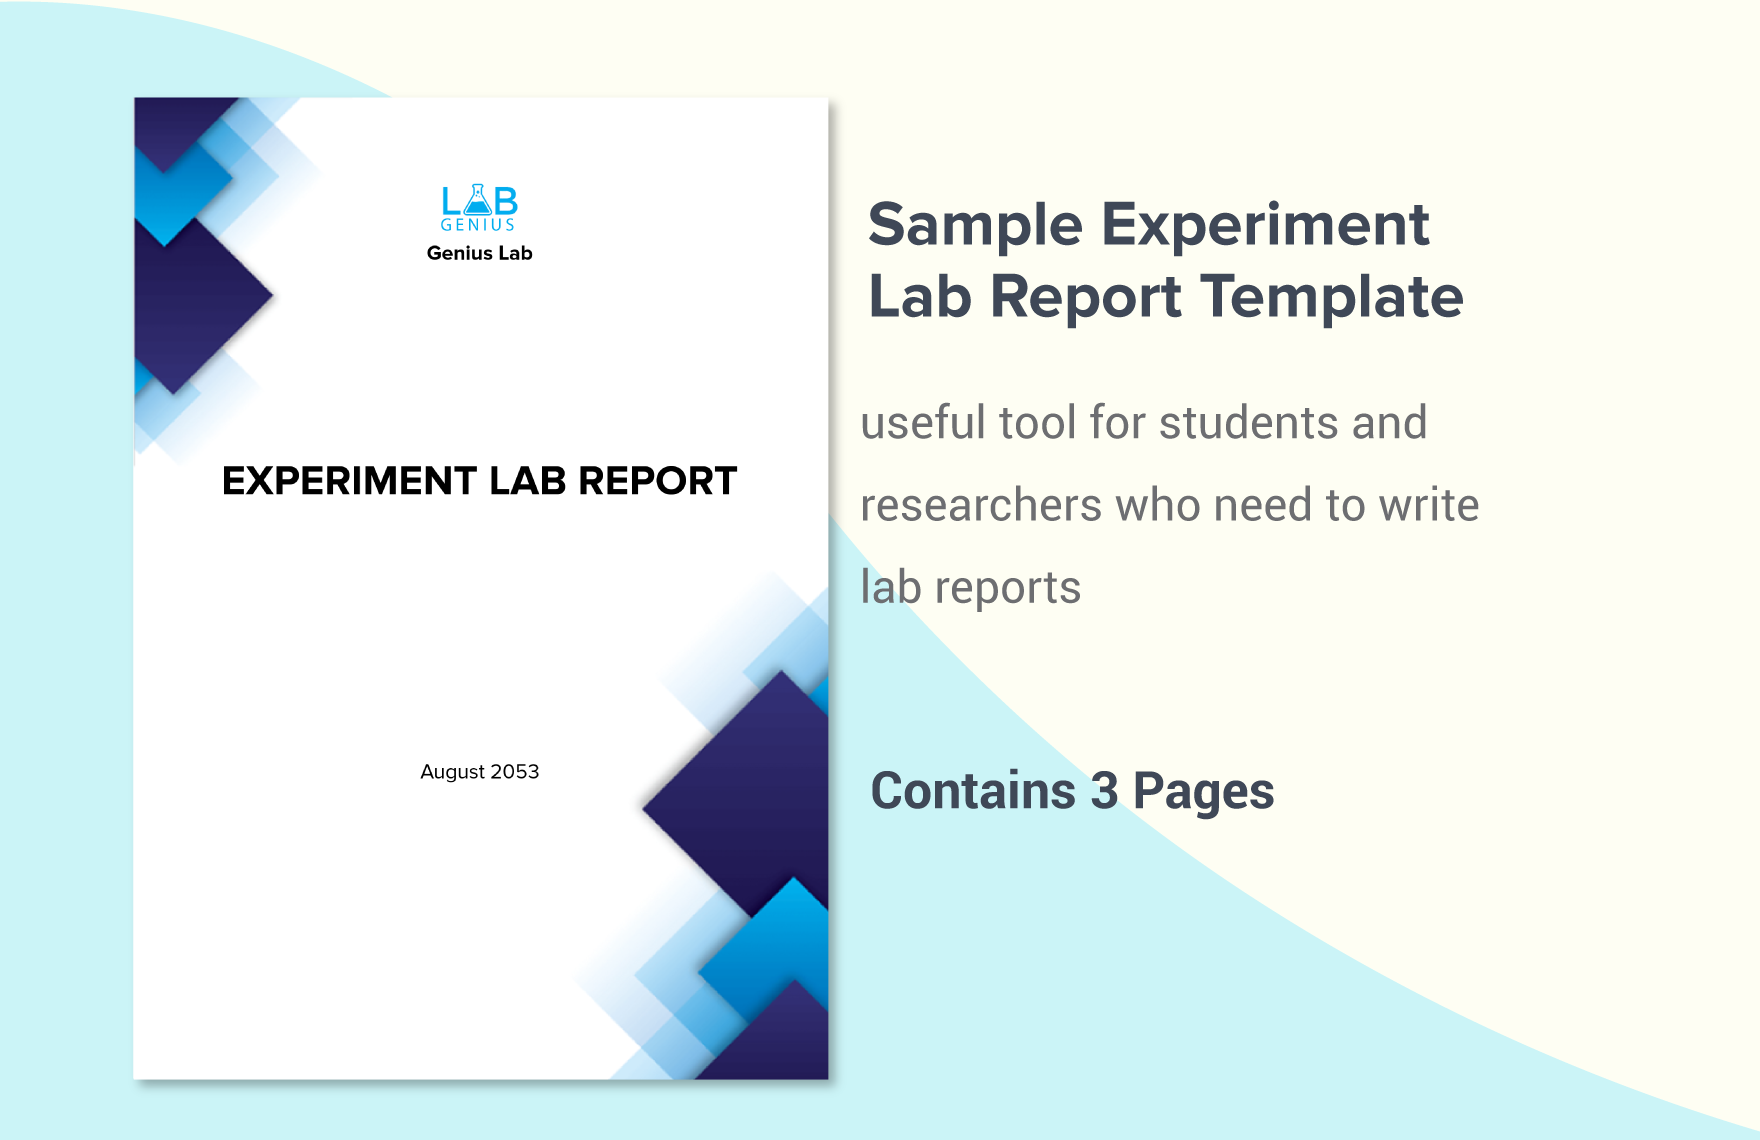 Sample Experiment Lab Report Template